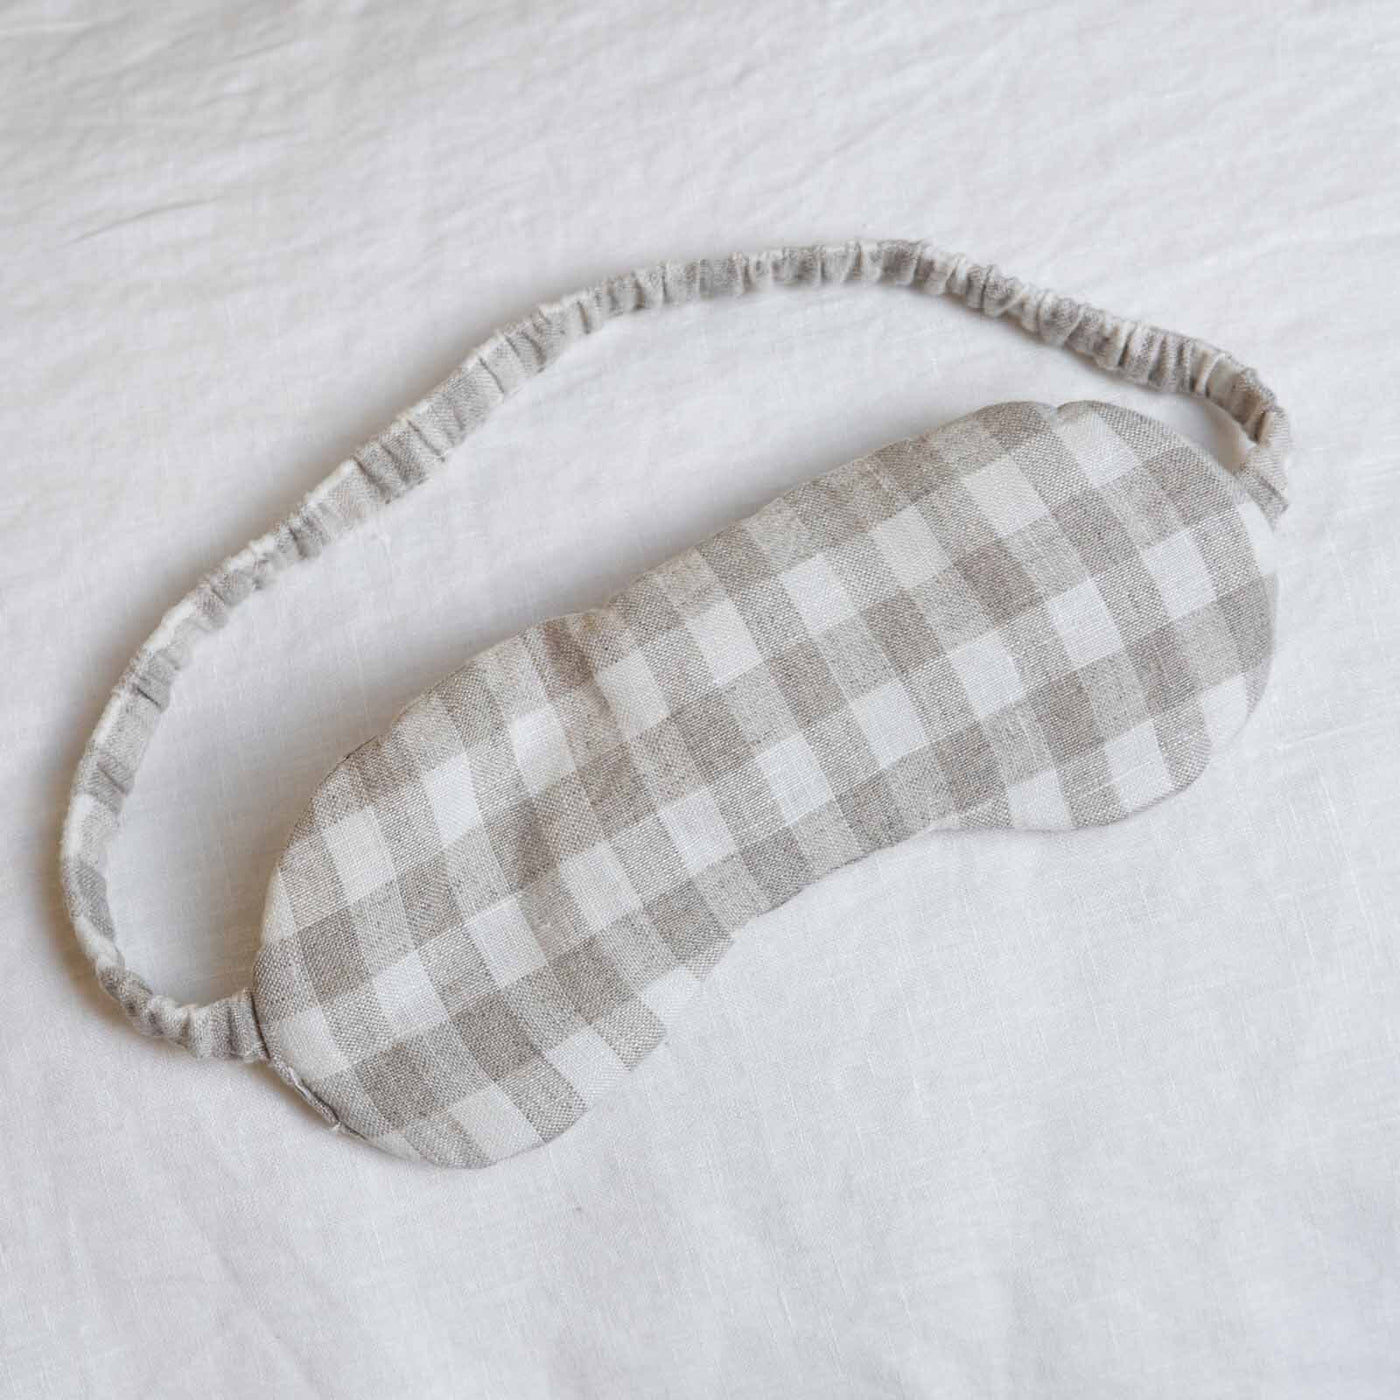 French Flax Linen Eye Mask in Beige Gingham